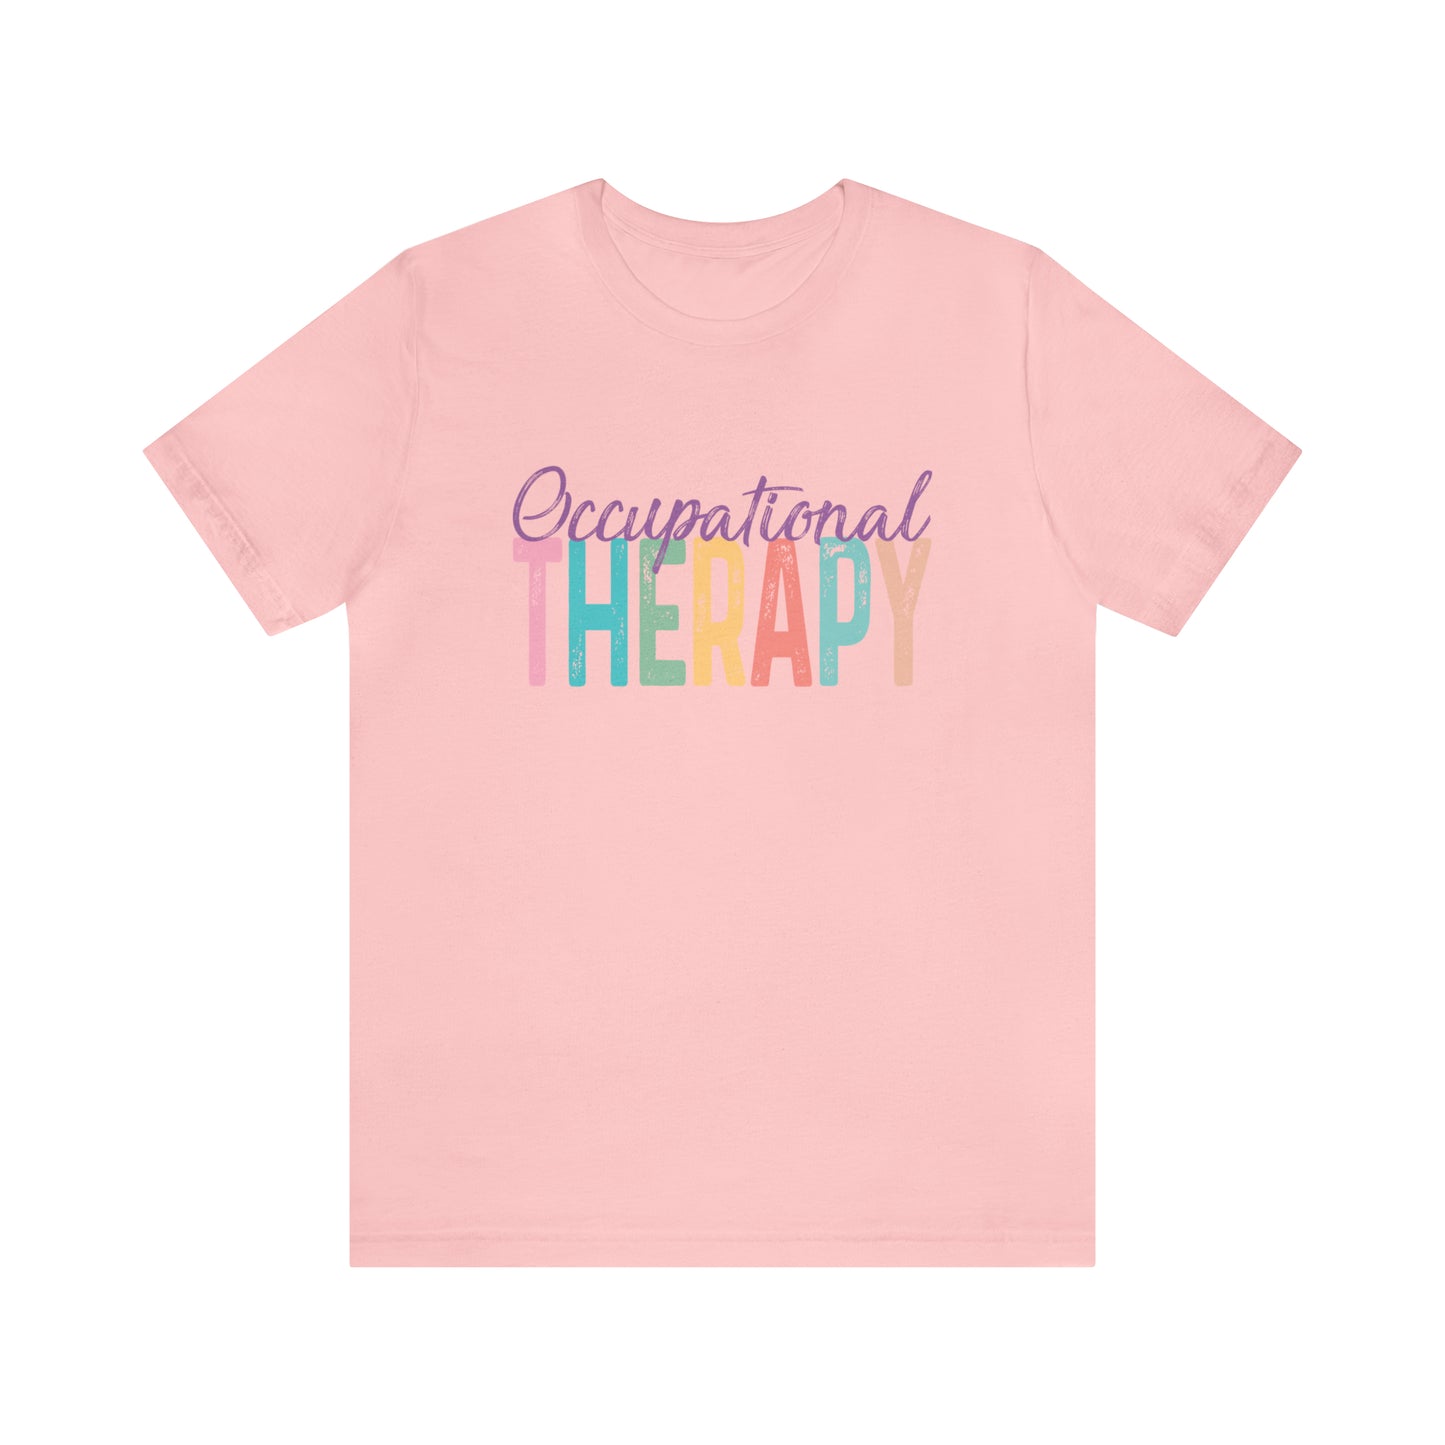 Pediatric Occupational Therapy OT Short Sleeve Tee